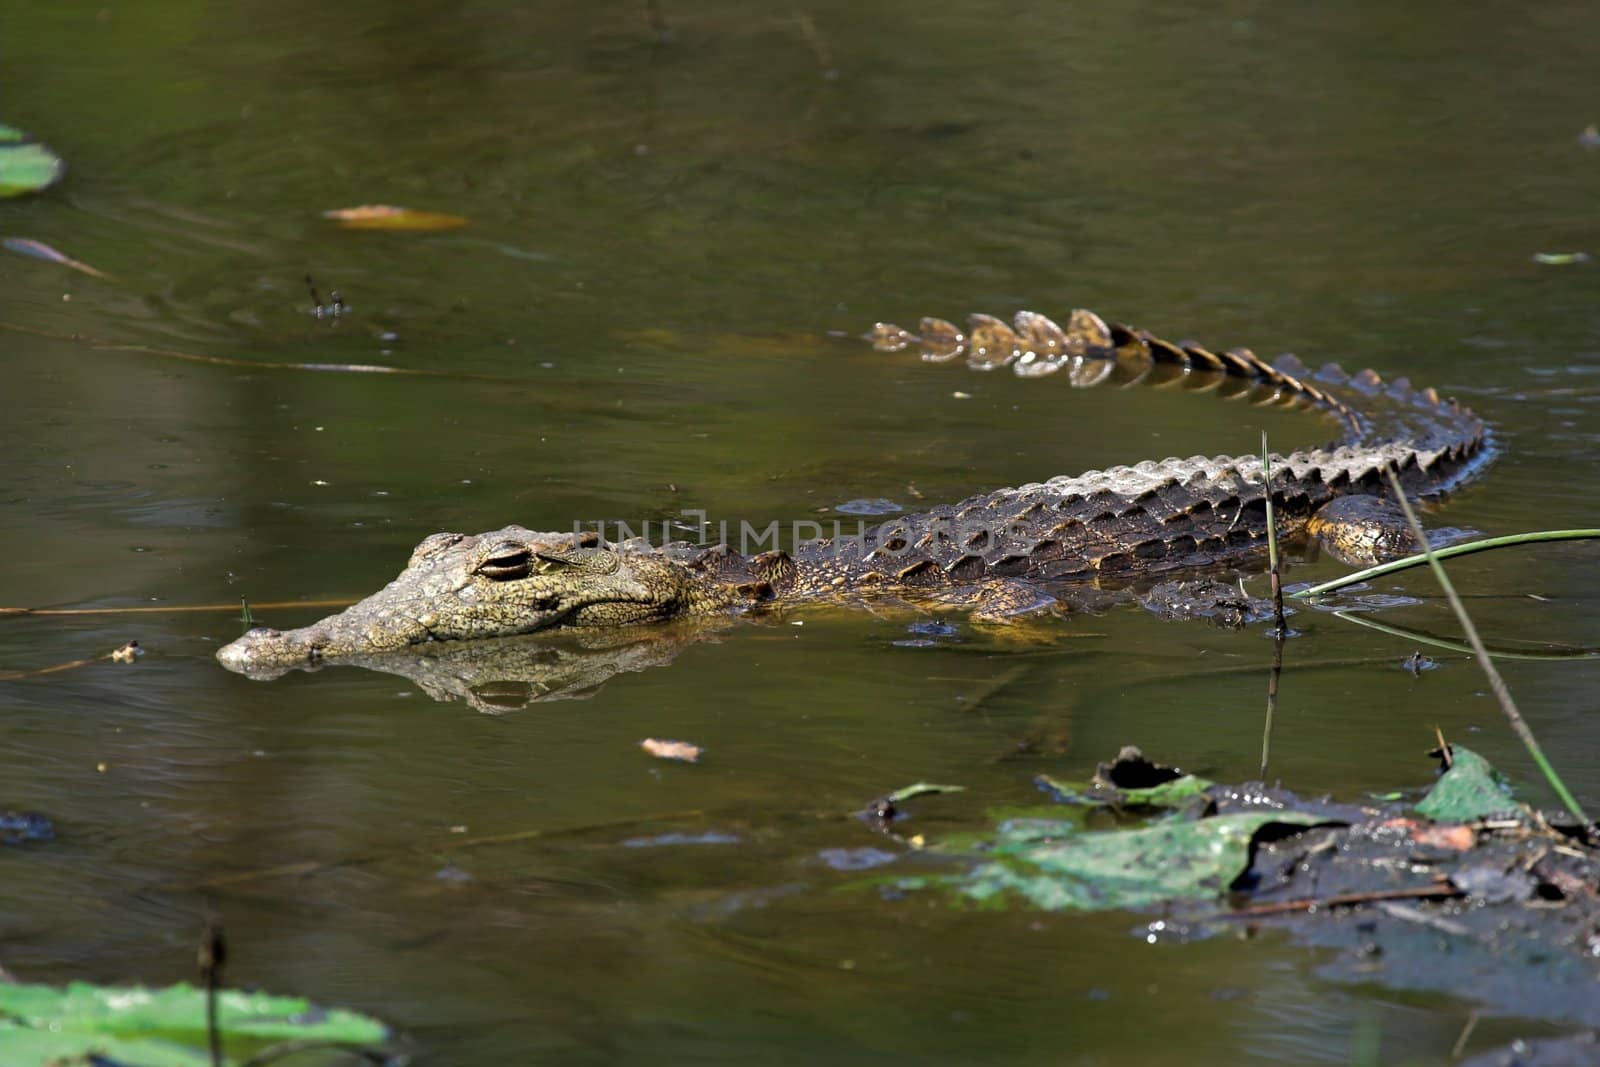 Juvenile Crocodile floating in the water